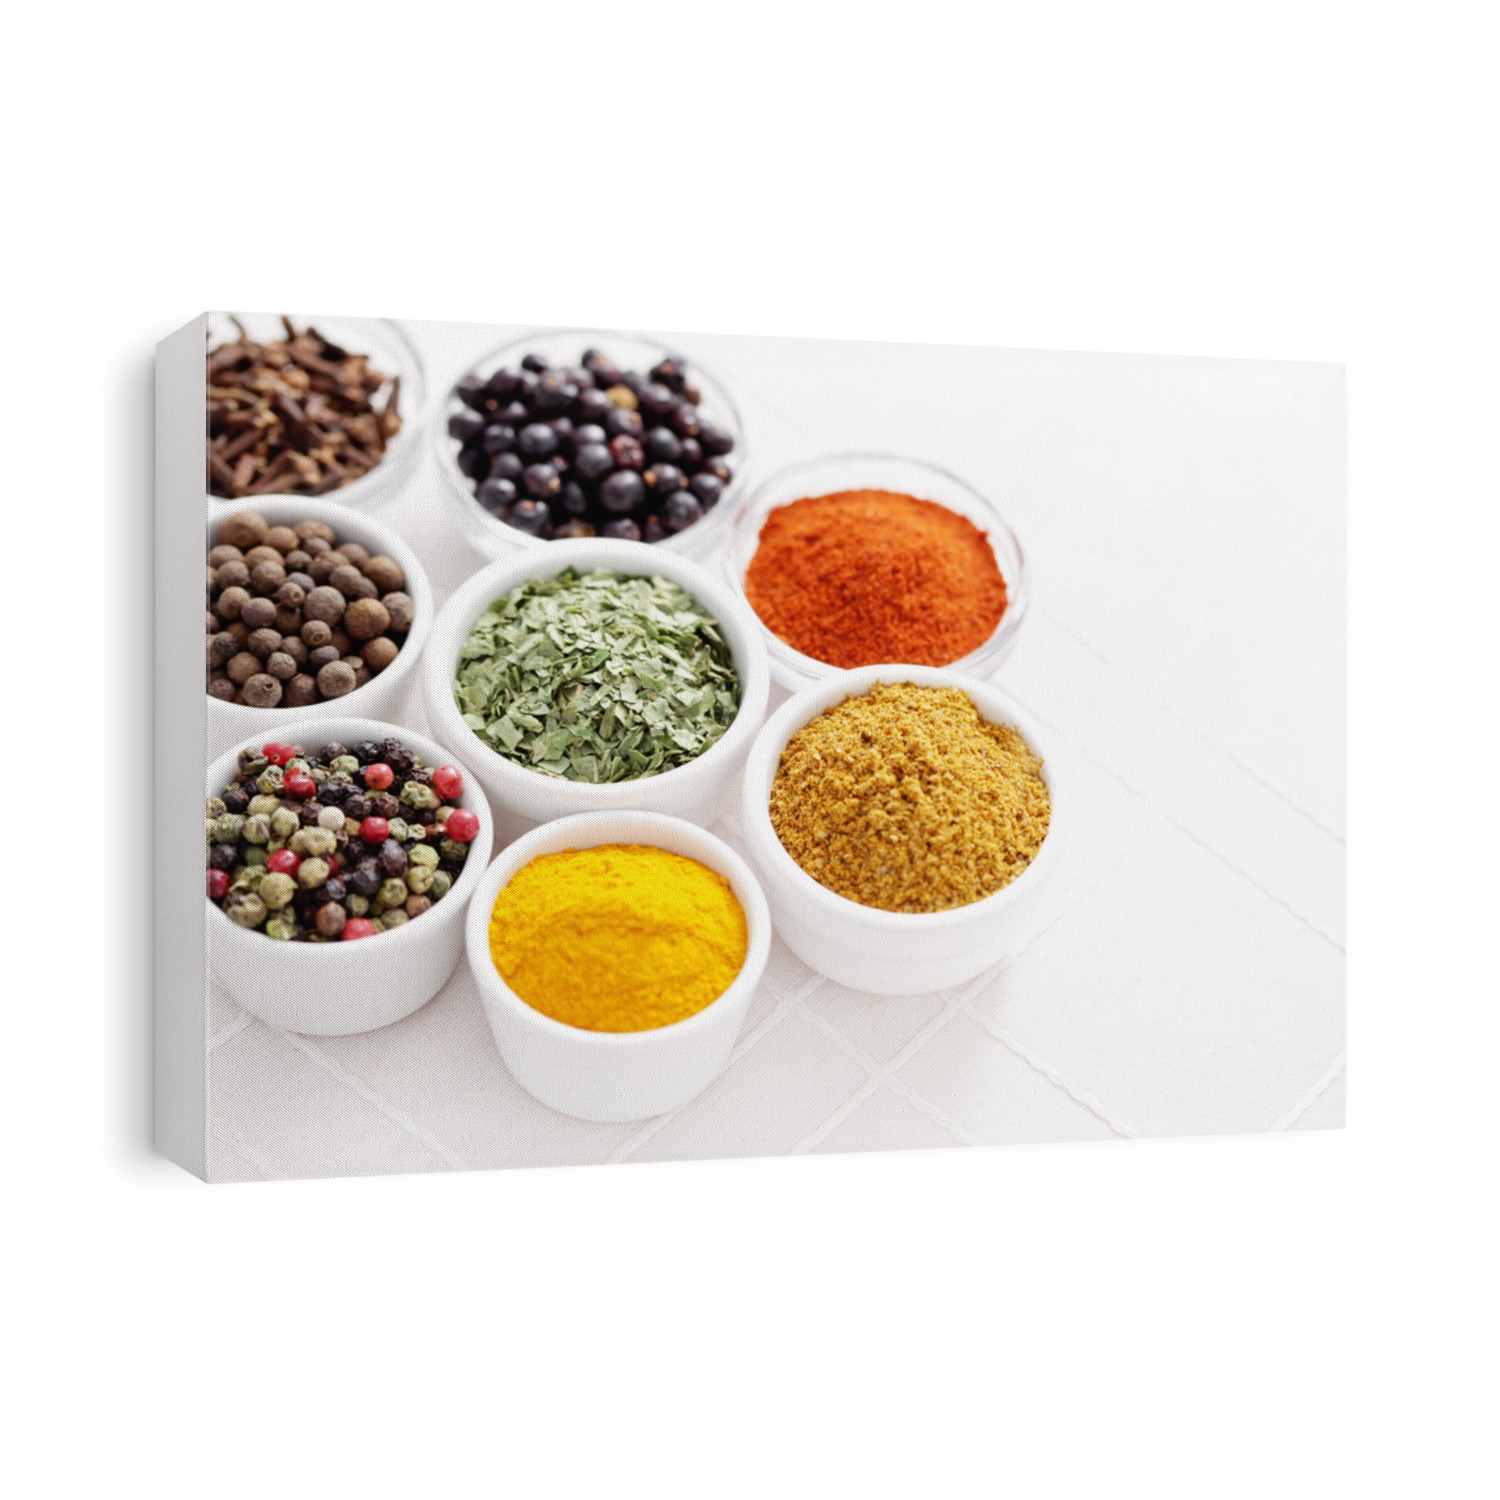 various kinds of spices in bowls - herbs and spices